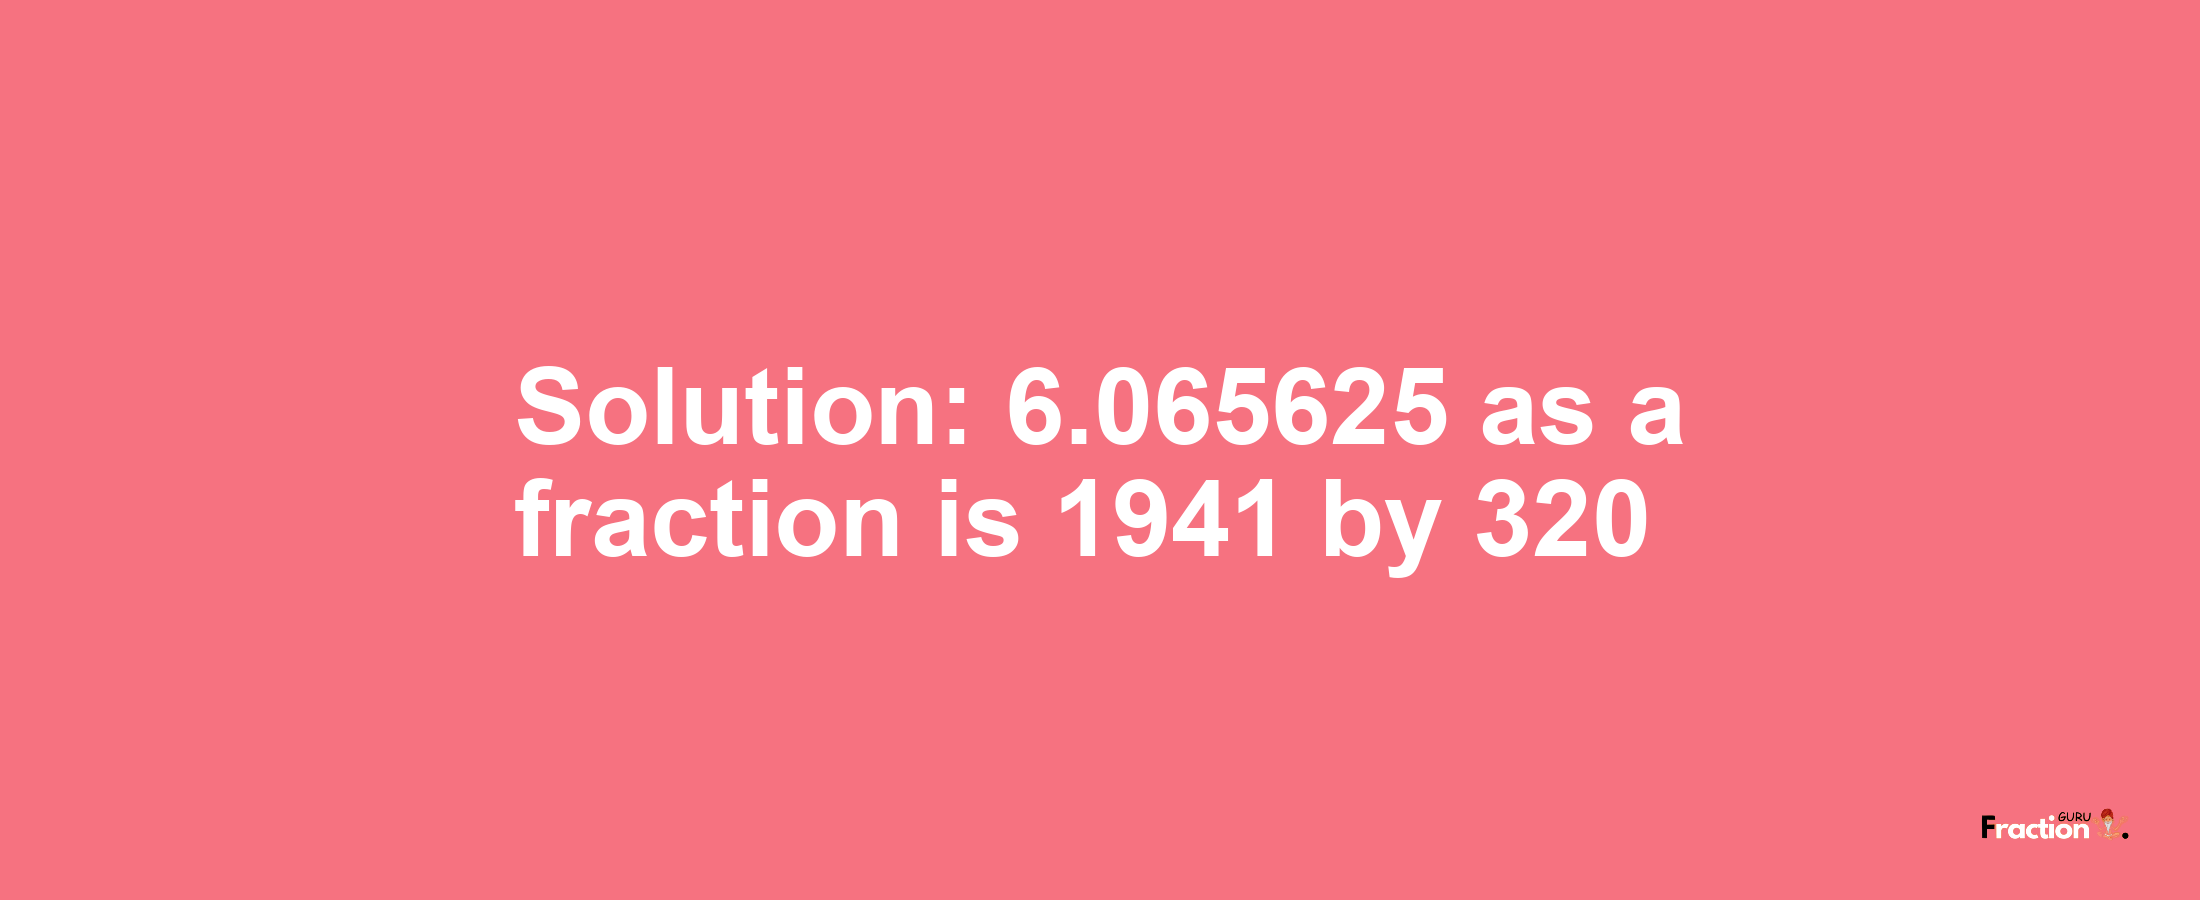 Solution:6.065625 as a fraction is 1941/320